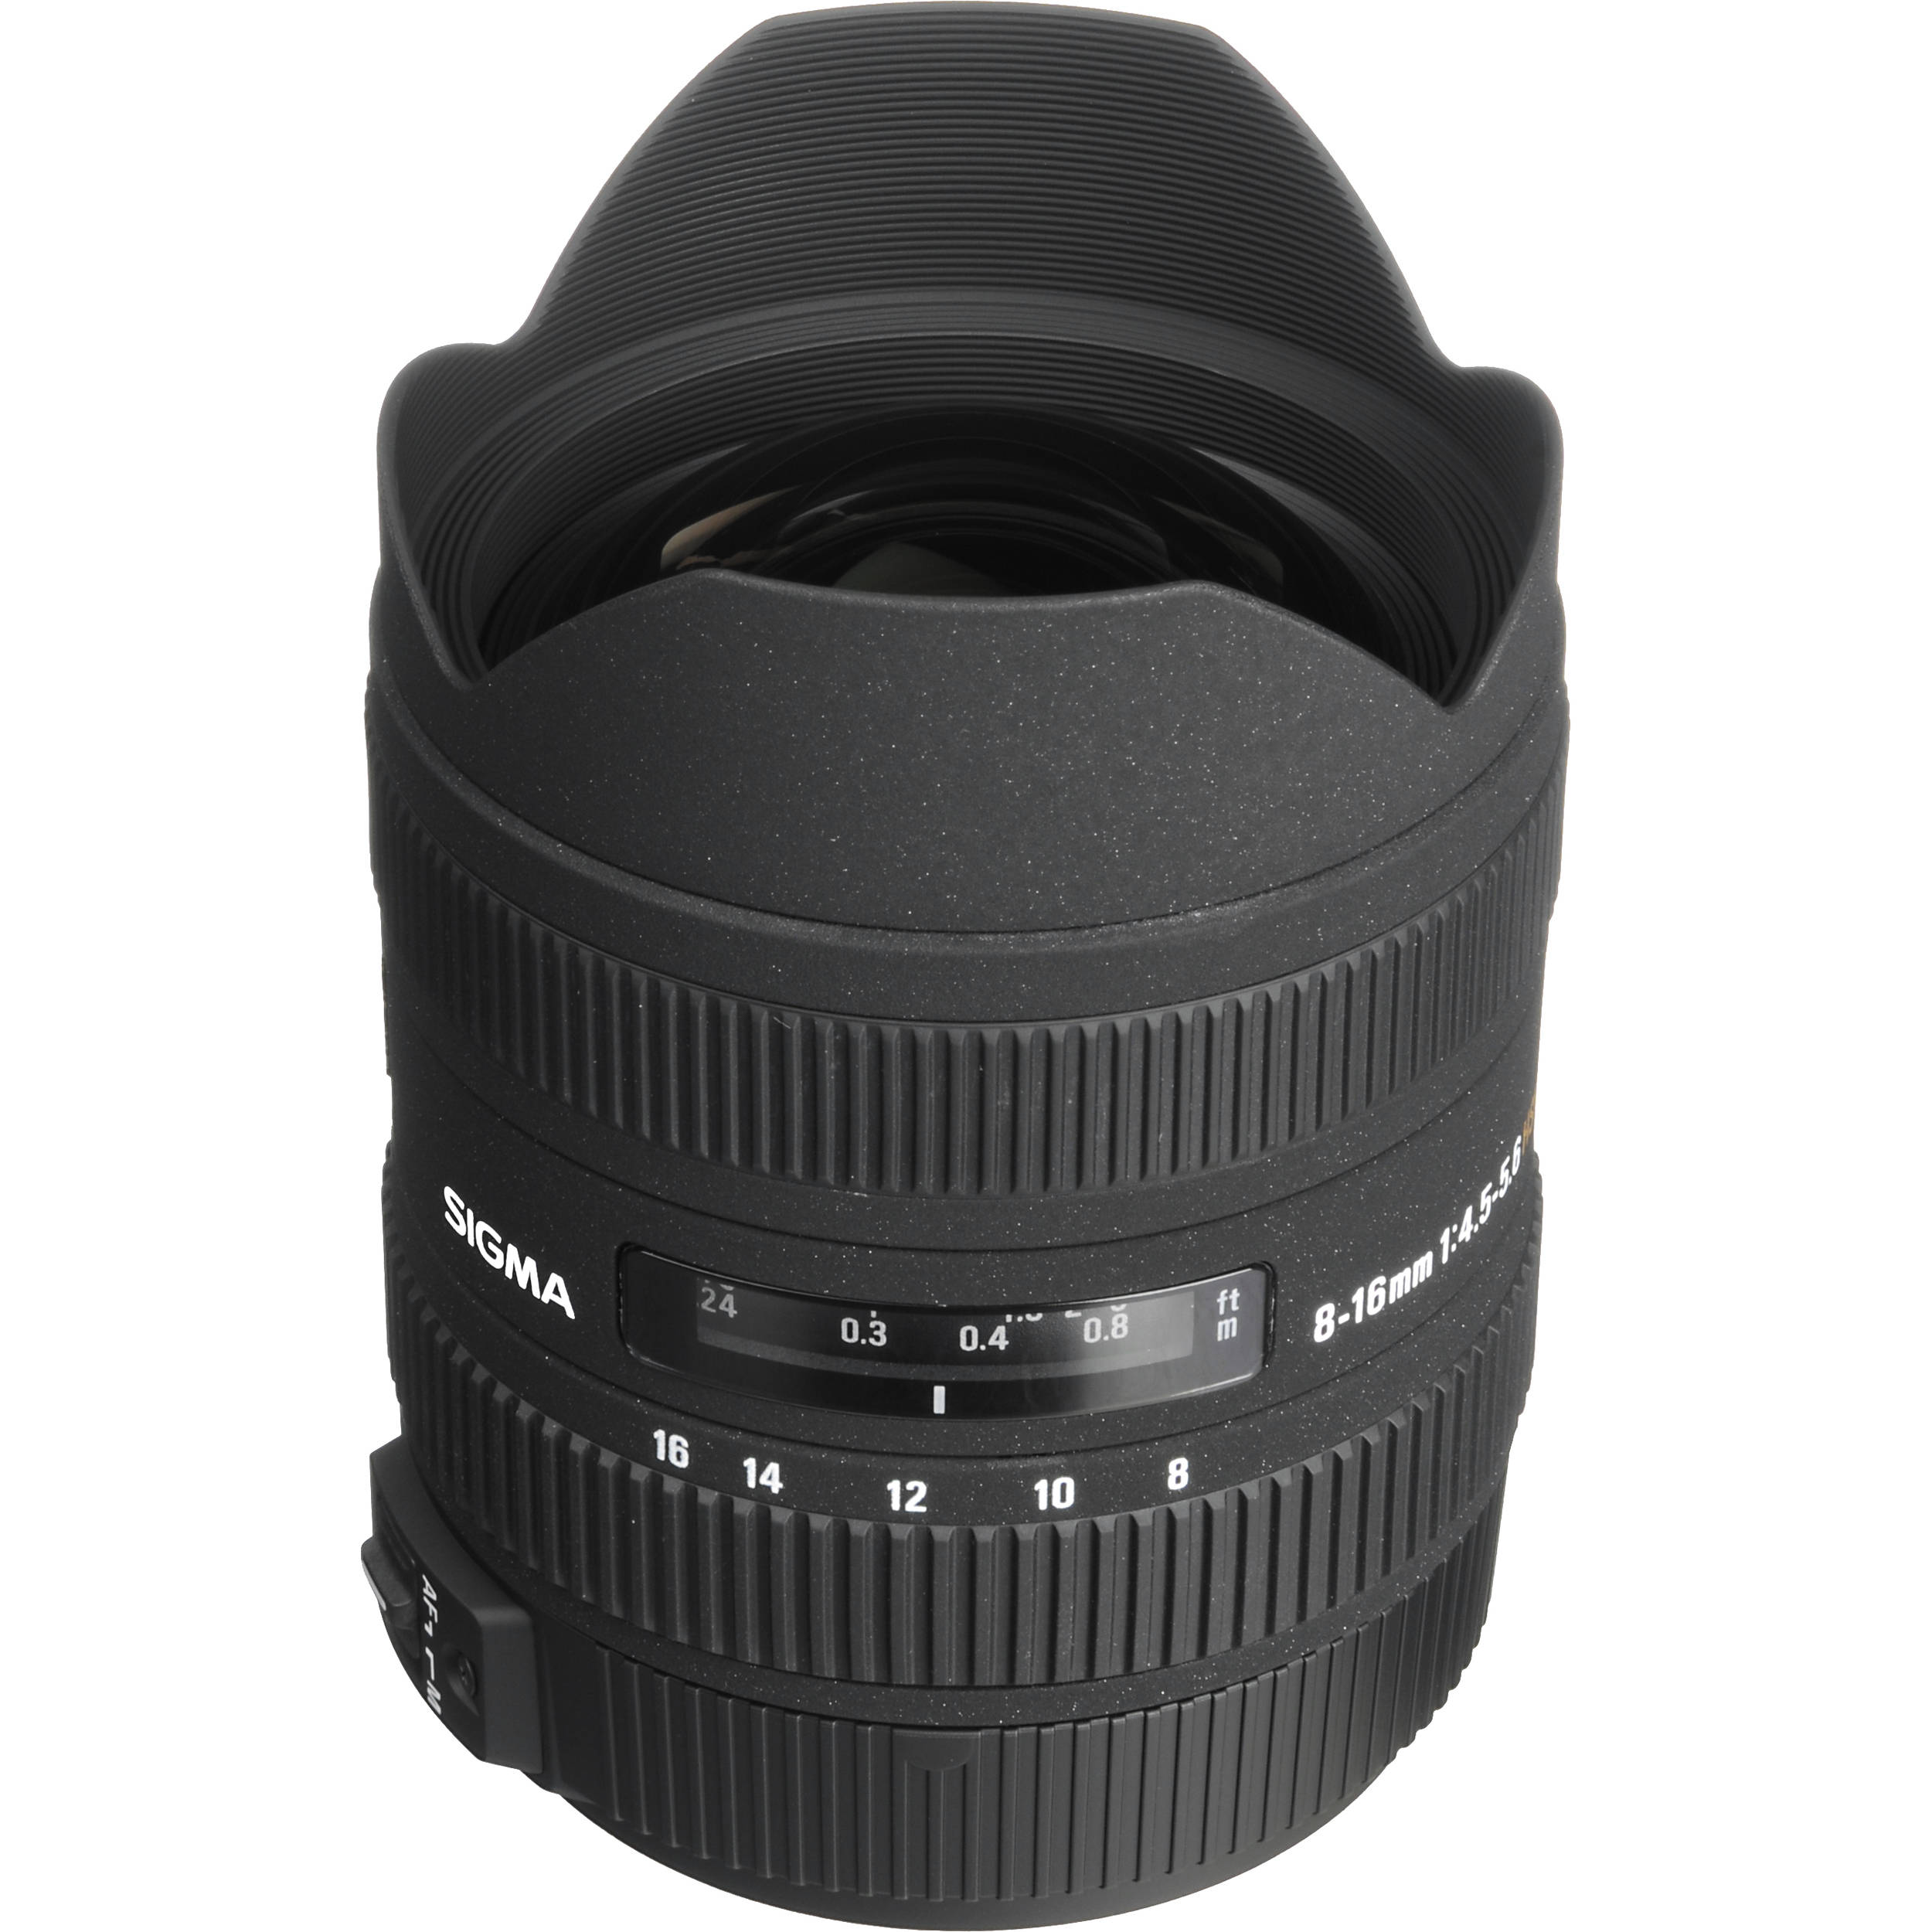 TThumbnail image for Sigma 8-16MM F/4.5-5.6 HSM - A MOUNT - *A+*